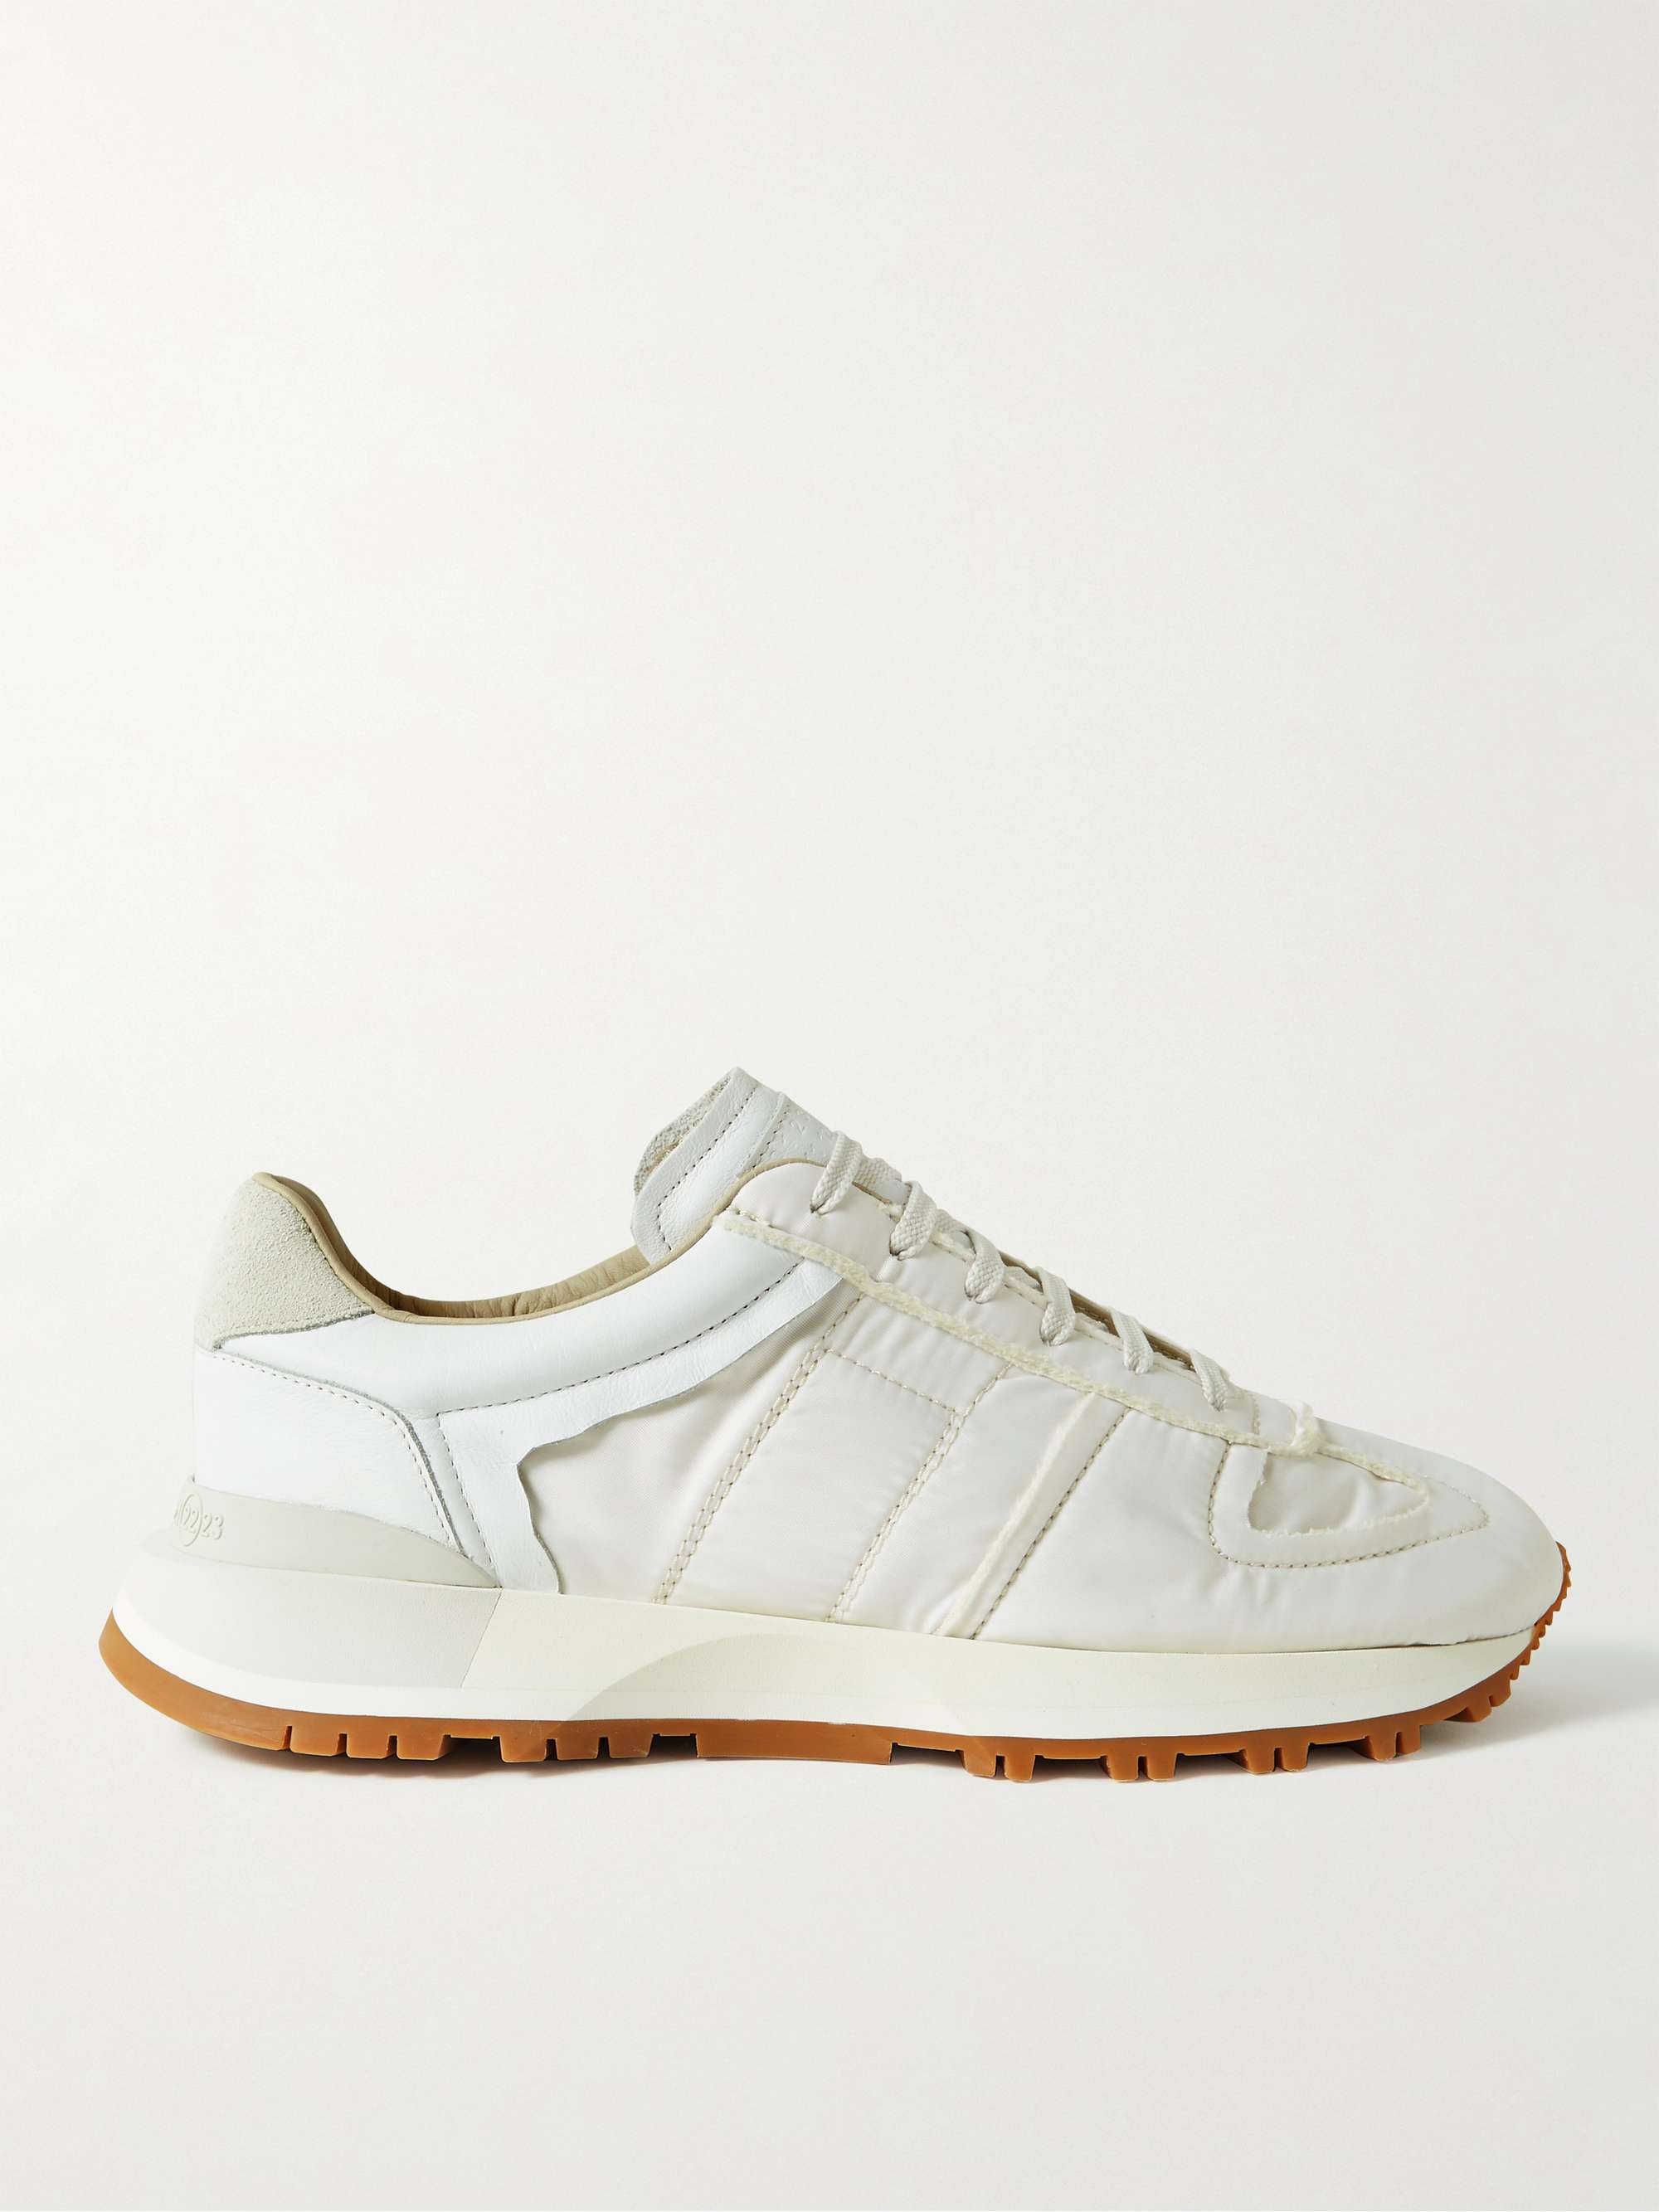 MAISON MARGIELA Runner Suede-Trimmed Leather and Nylon Sneakers PORTER